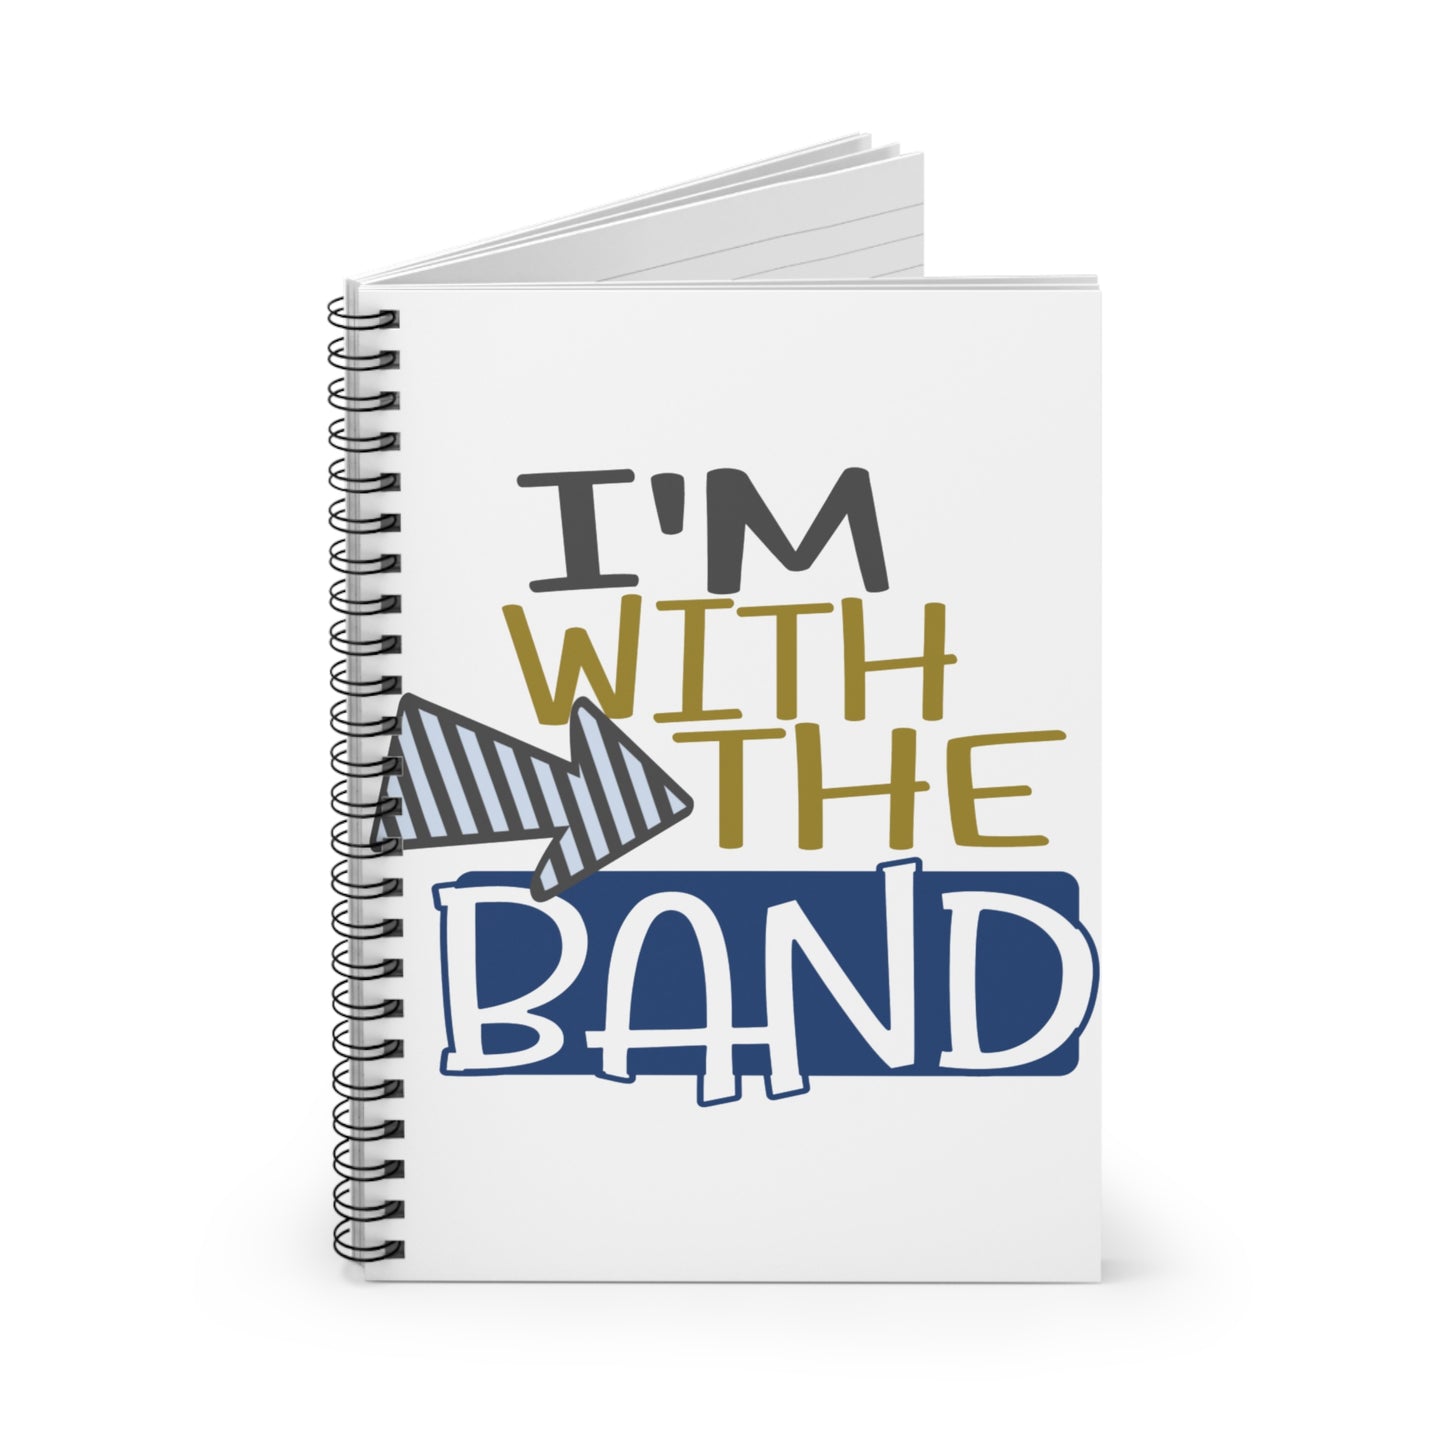 With the Band: Spiral Notebook - Log Books - Journals - Diaries - and More Custom Printed by TheGlassyLass.com